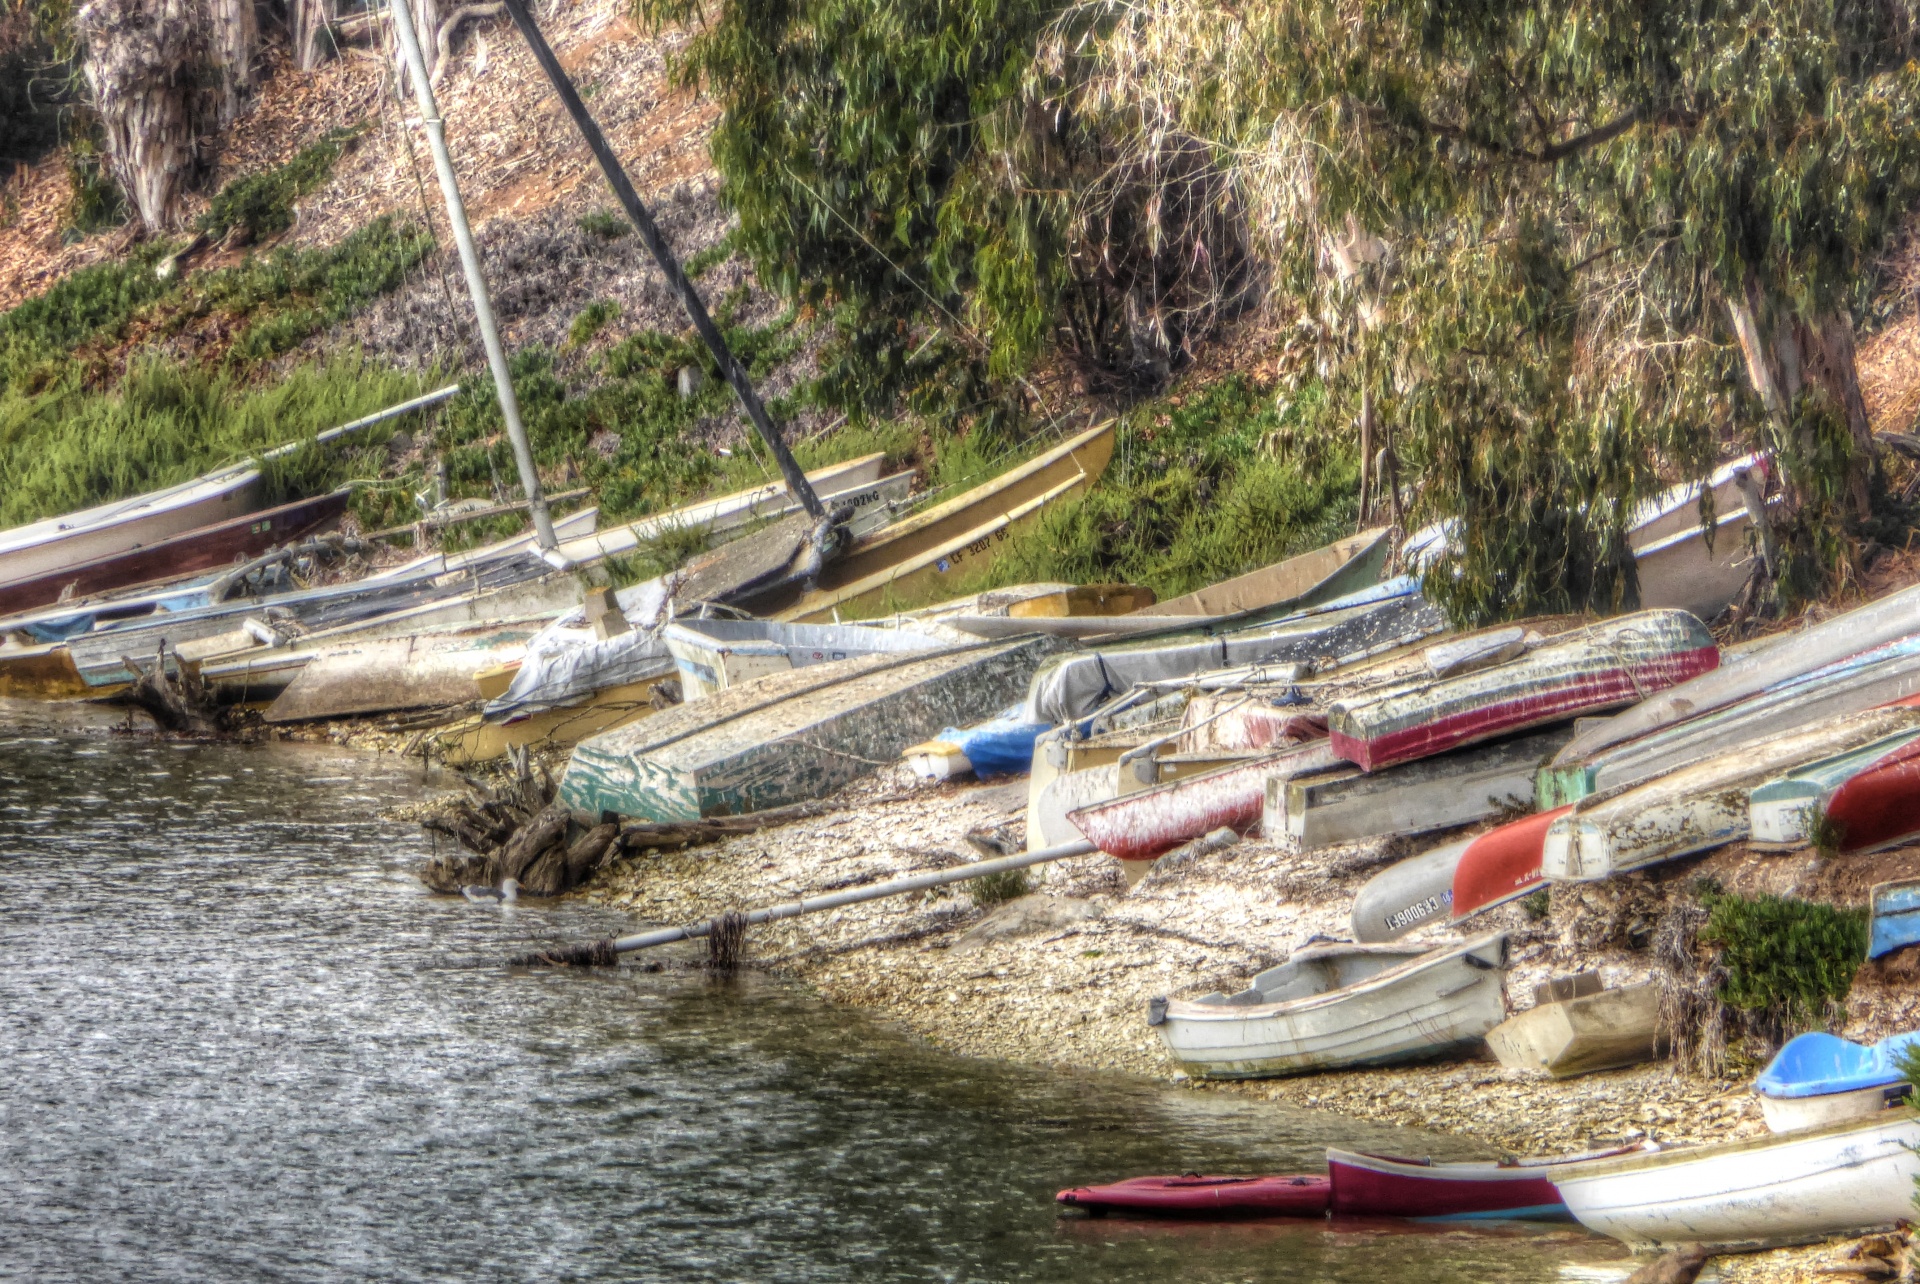 artistic touch applied to row of rowboats turned up on shore